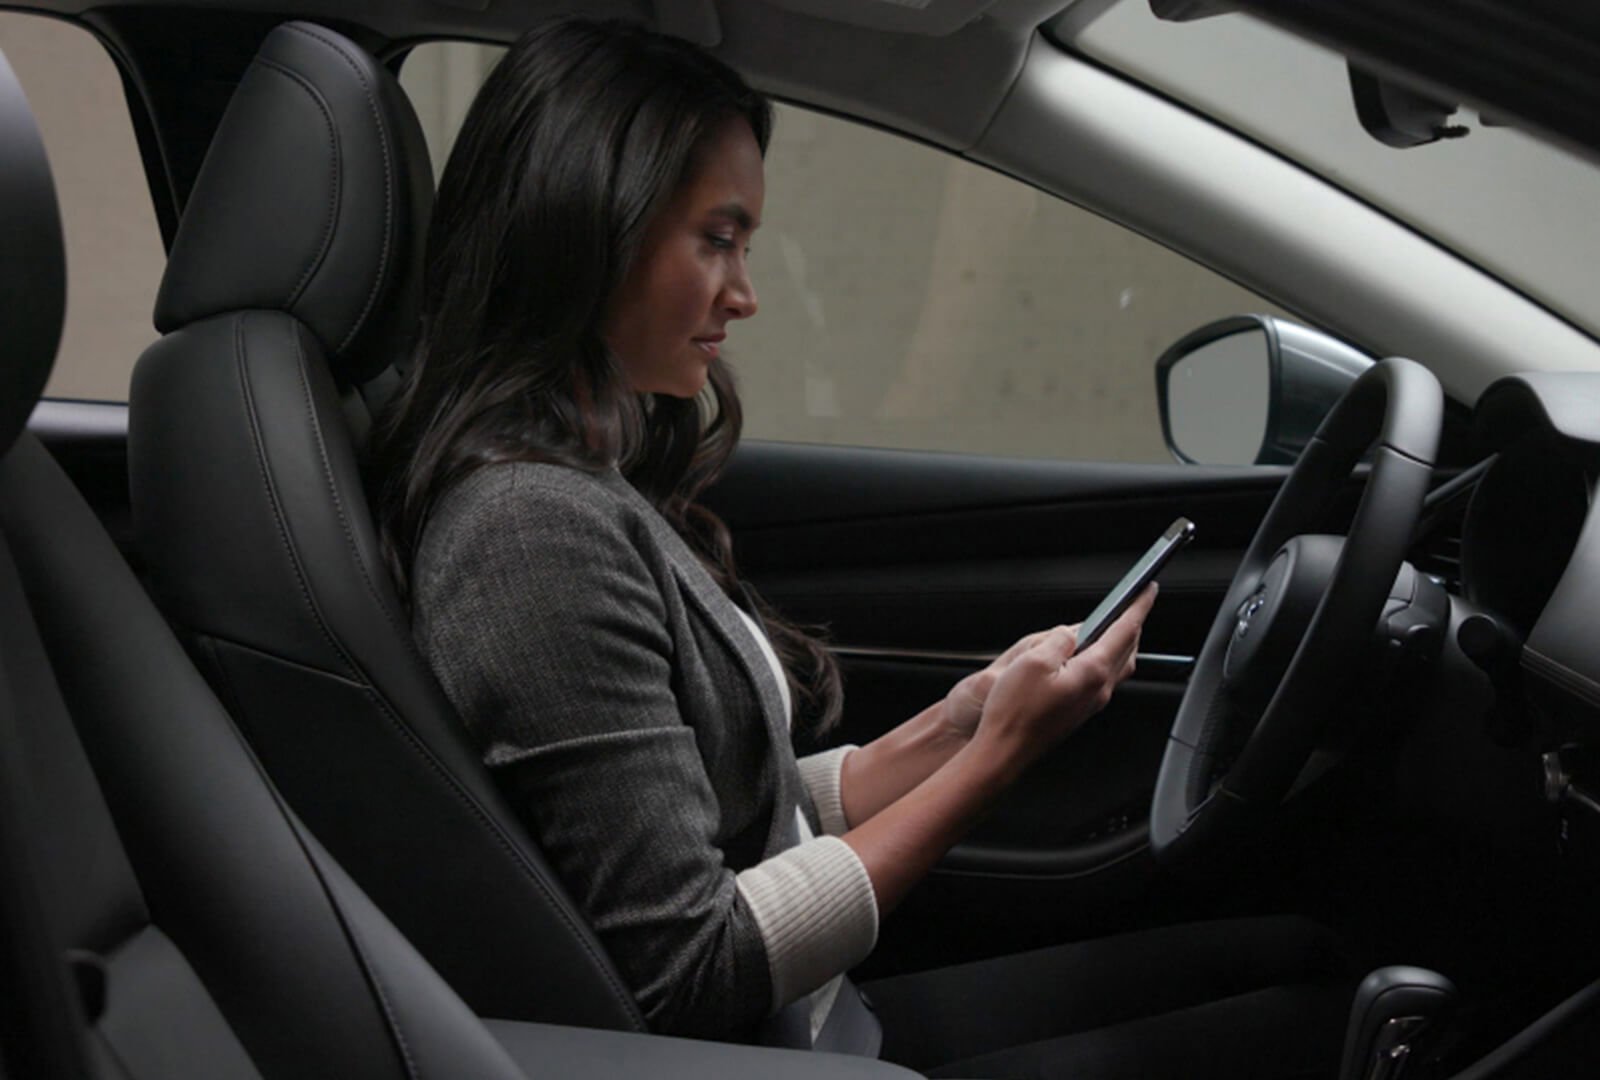 Interior view of woman in driver’s seat of parked Mazda SUV looking at smartphone she’s holding in her hands.